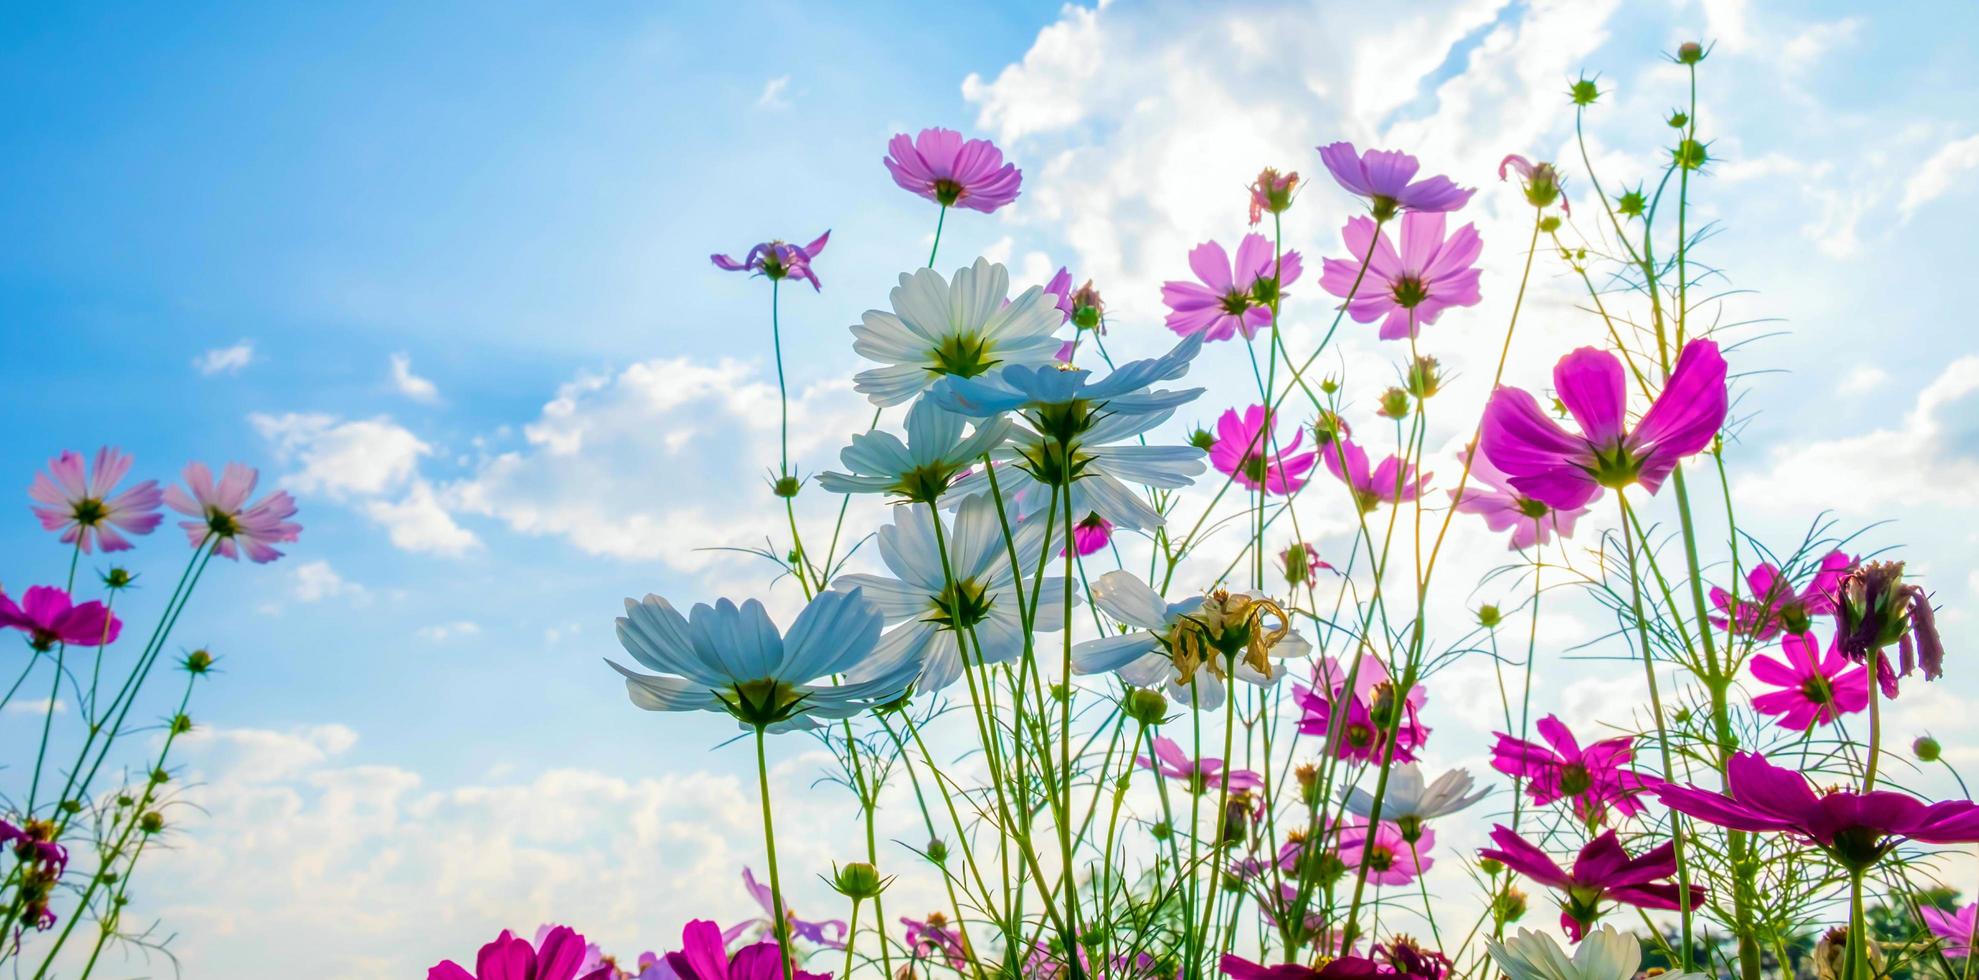 Cosmos flower background and blue sky photo